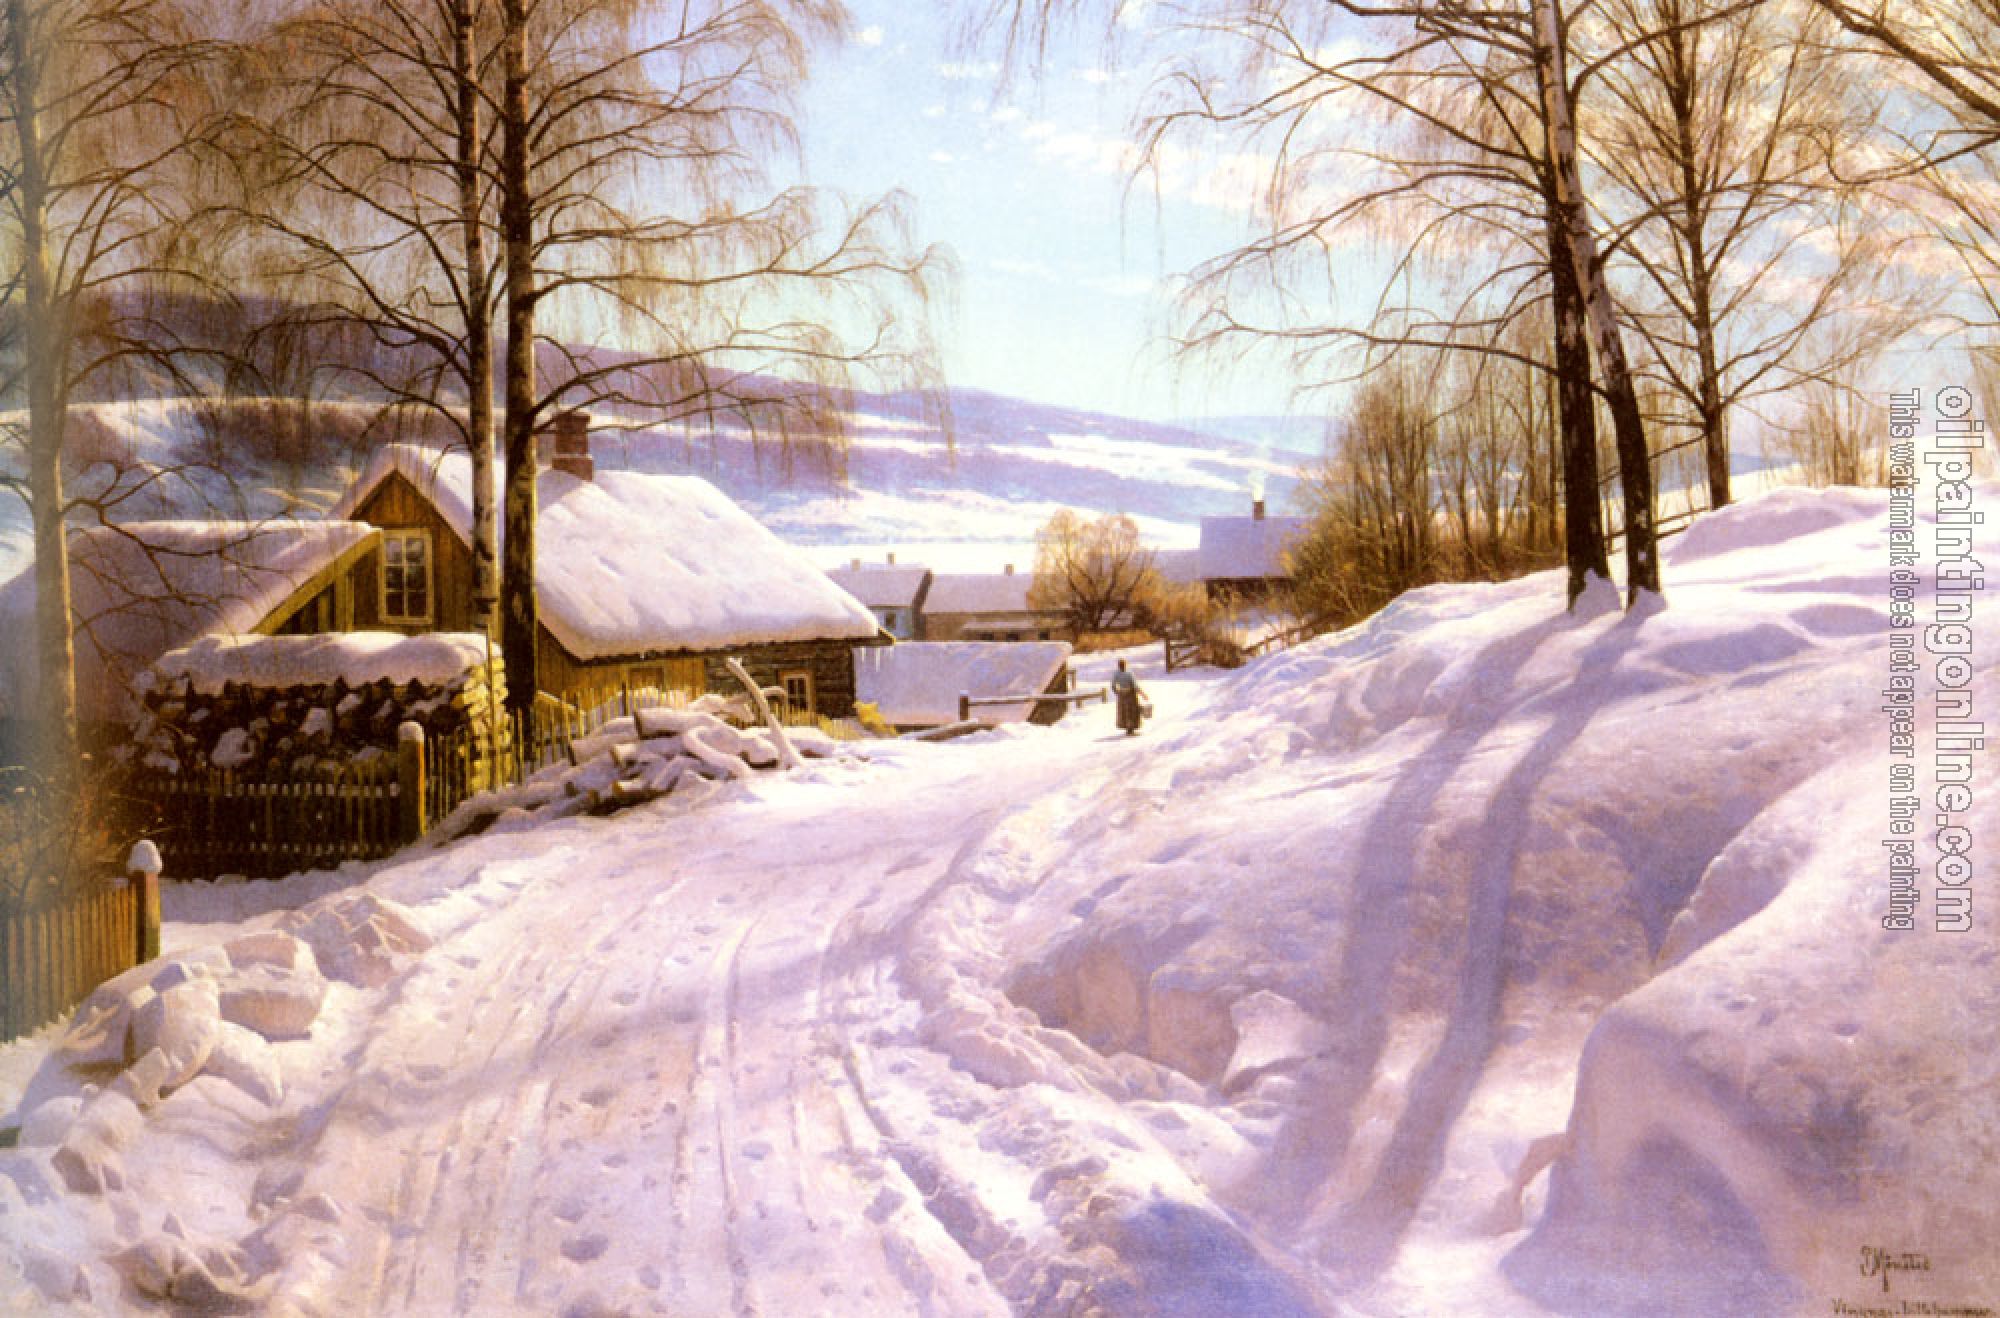 Monsted, Peder Mork - On The Snowy Path